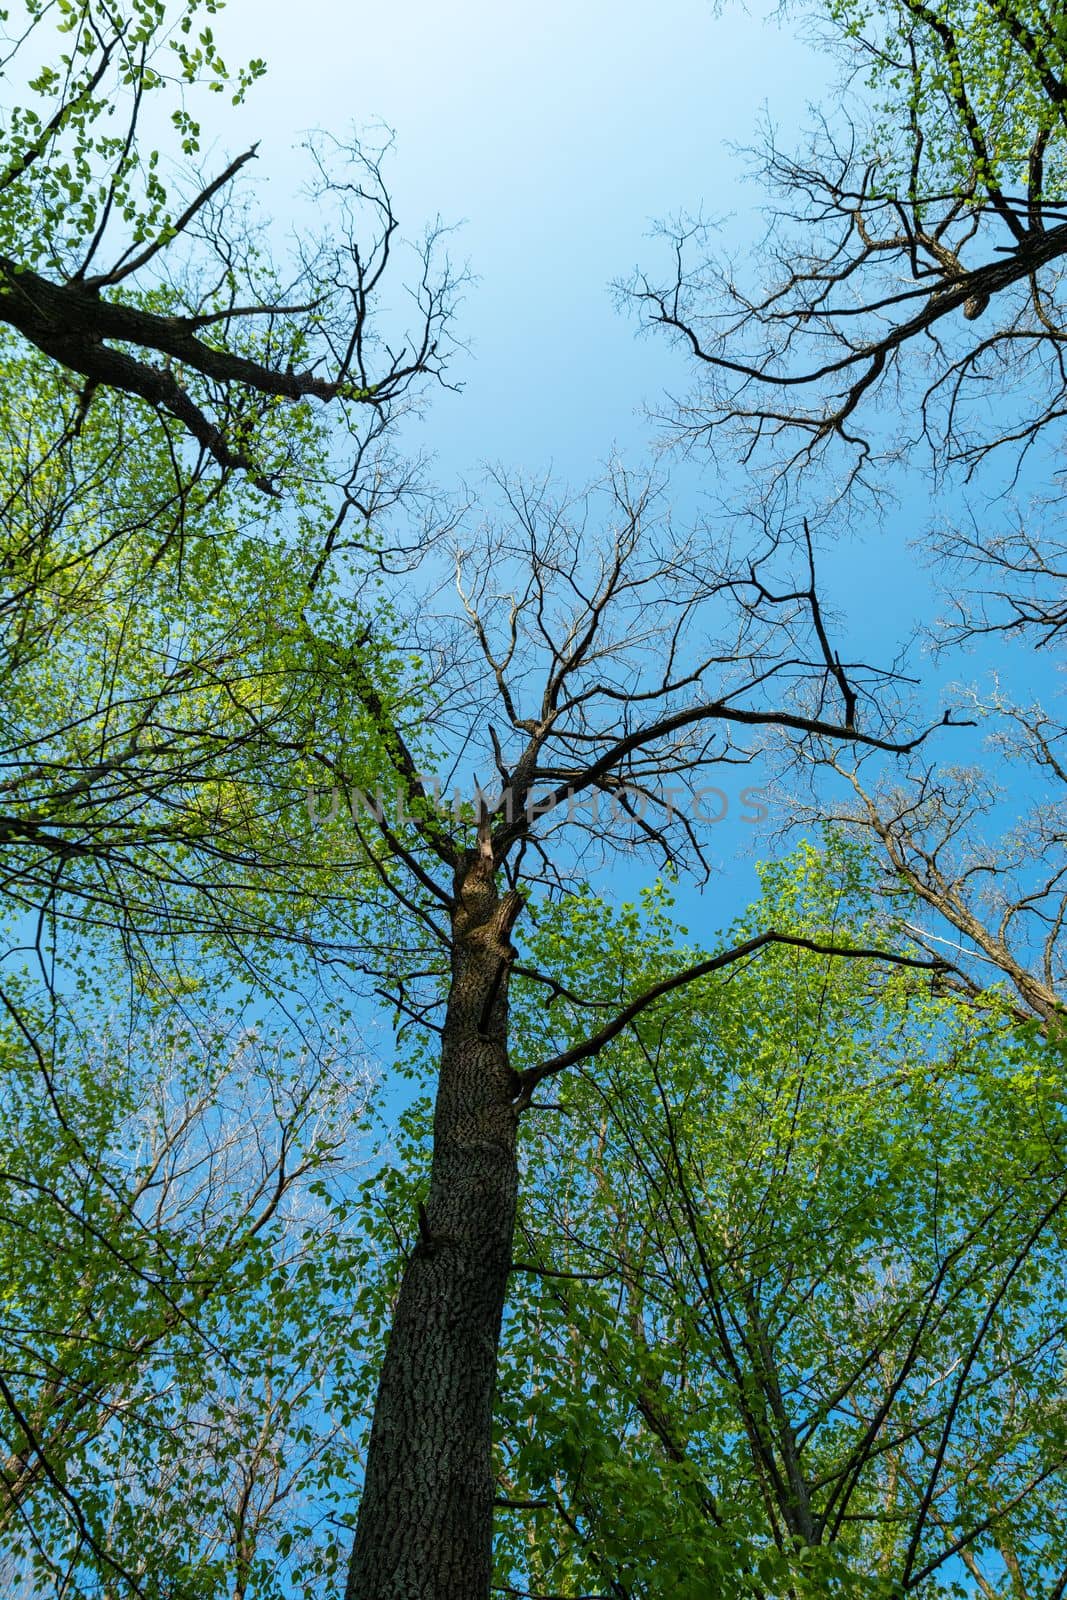 Bottom view of the treetops on a clear spring day